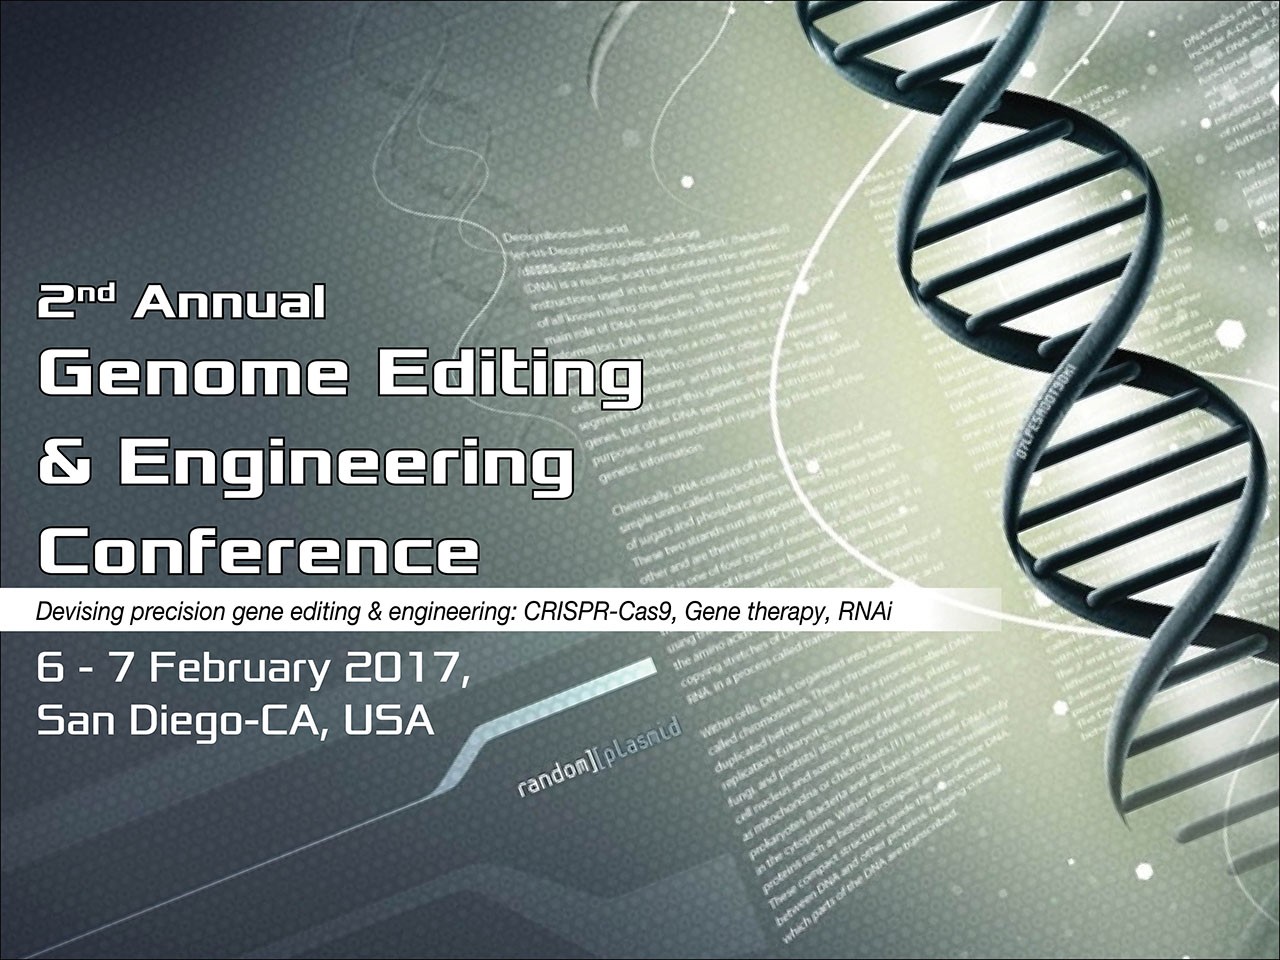 2nd Annual Genome Editing & Engineering Conference